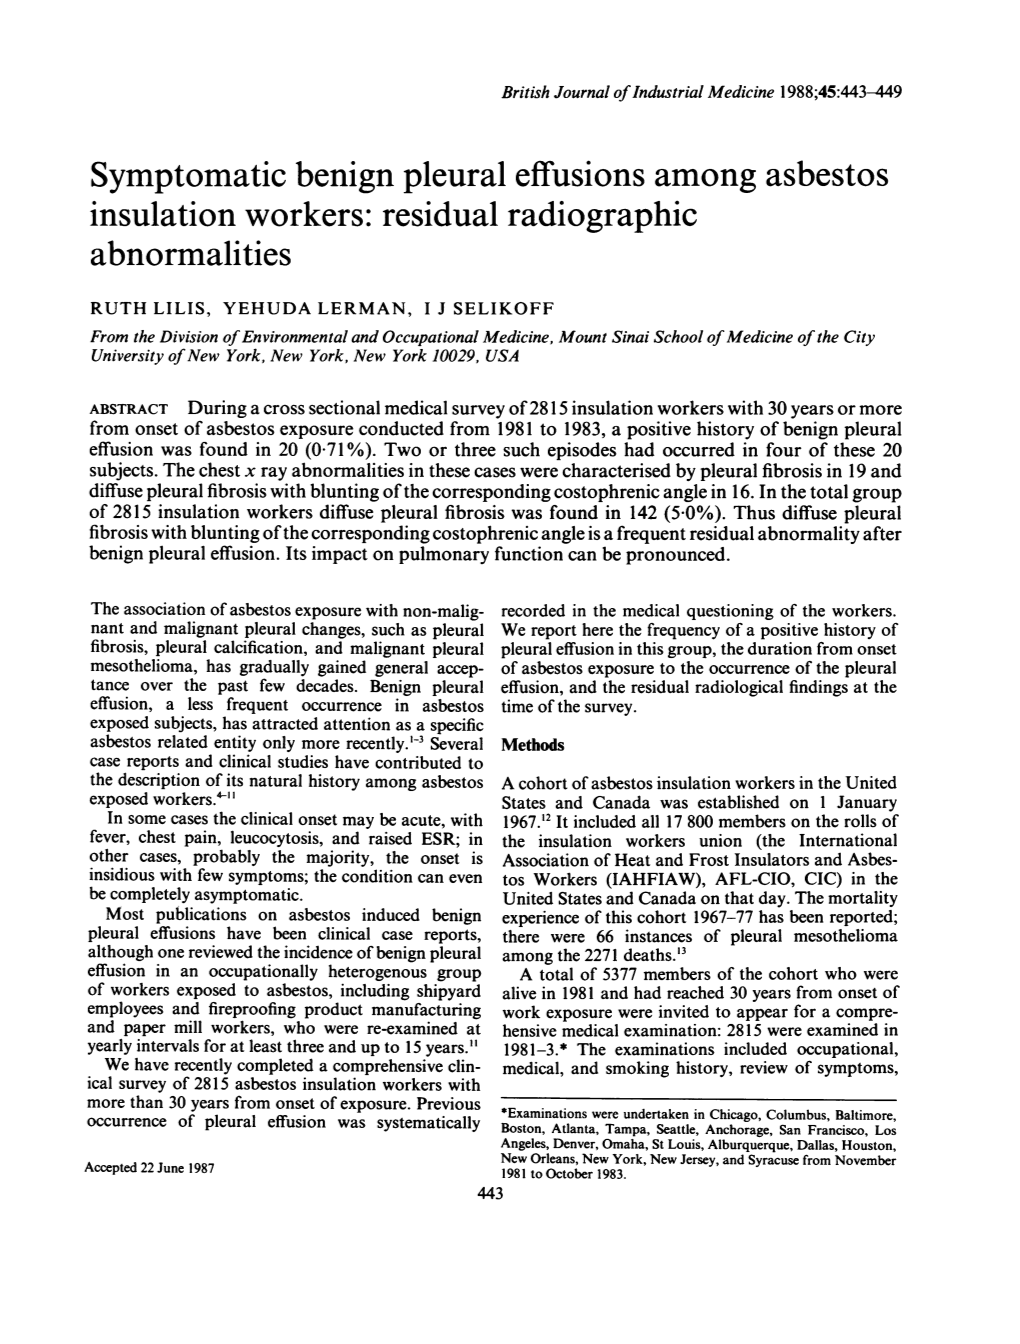 Symptomatic Benign Pleural Effusions Among Asbestos Insulation Workers: Residual Radiographic Abnormalities